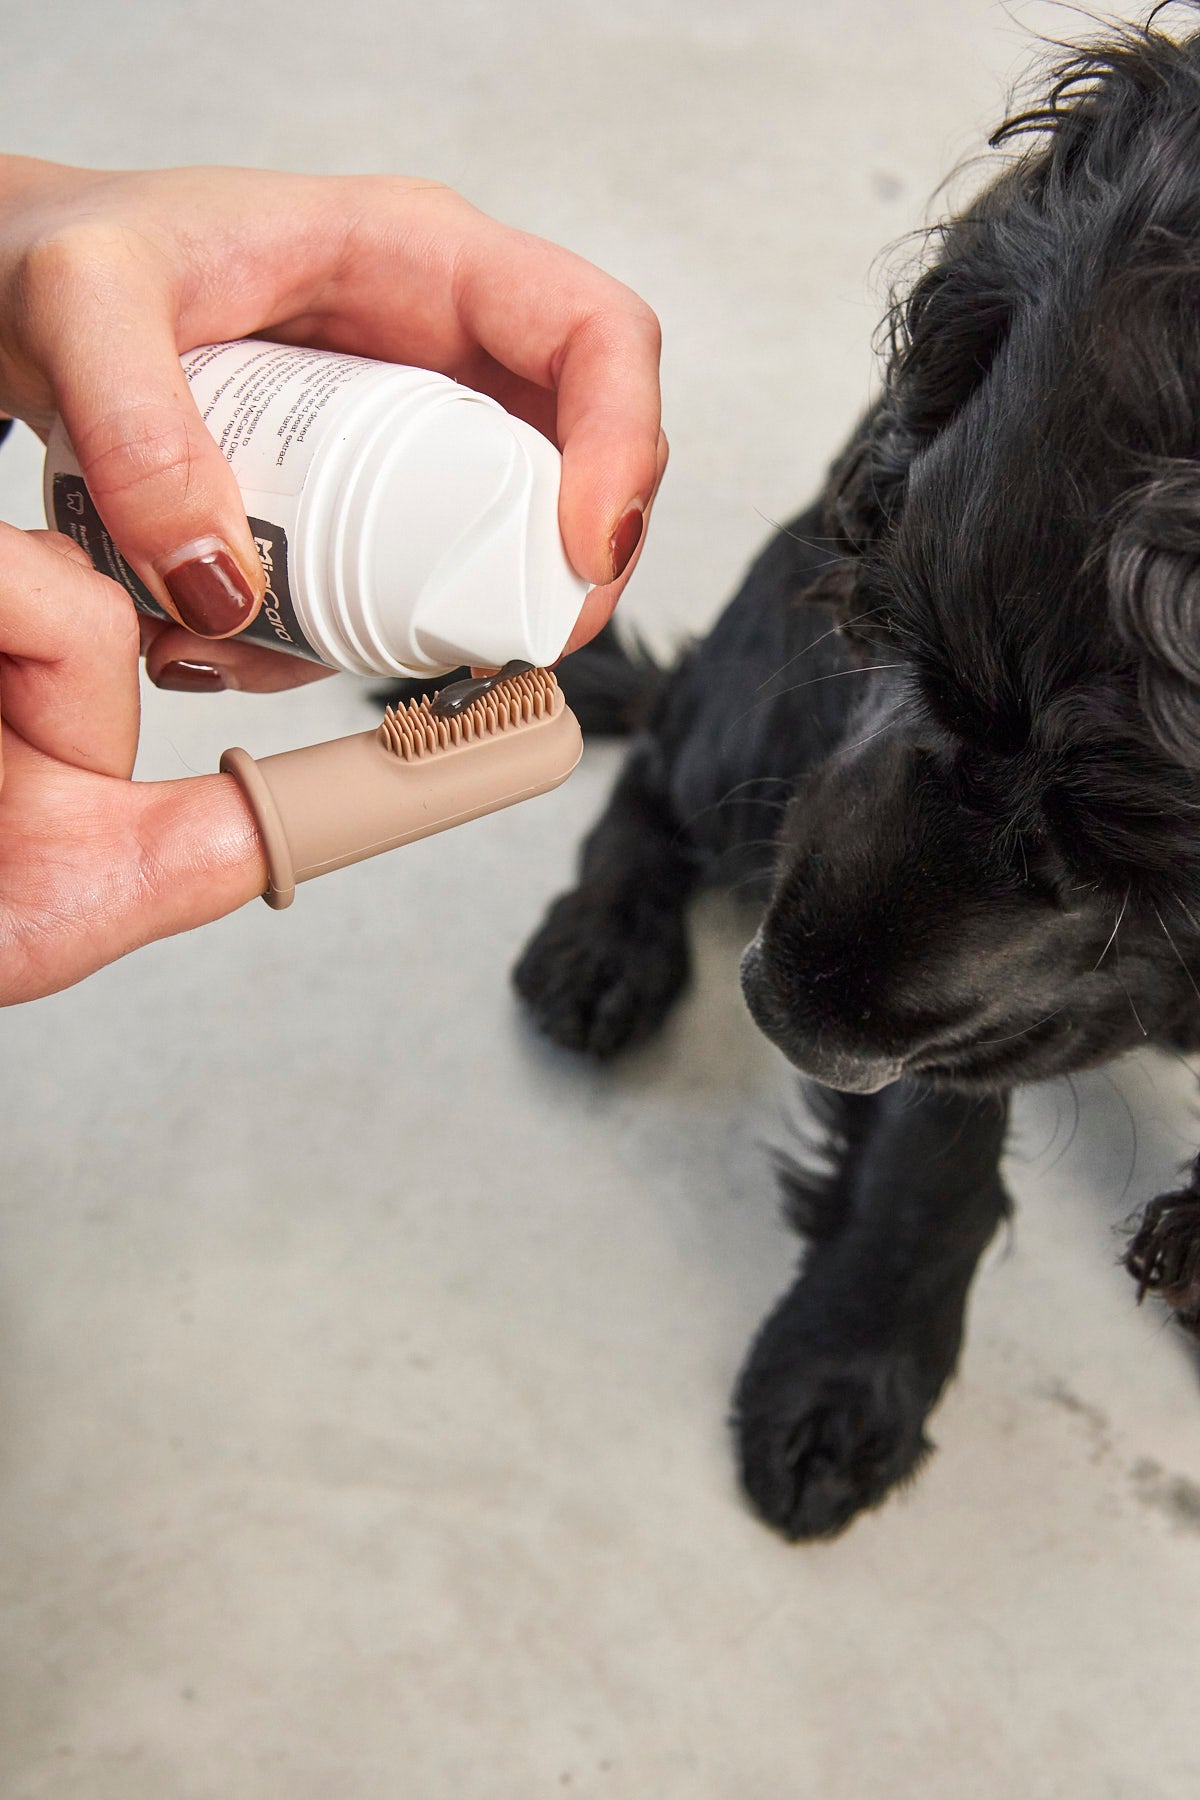 Easy to use dog toothbrush in muted colors